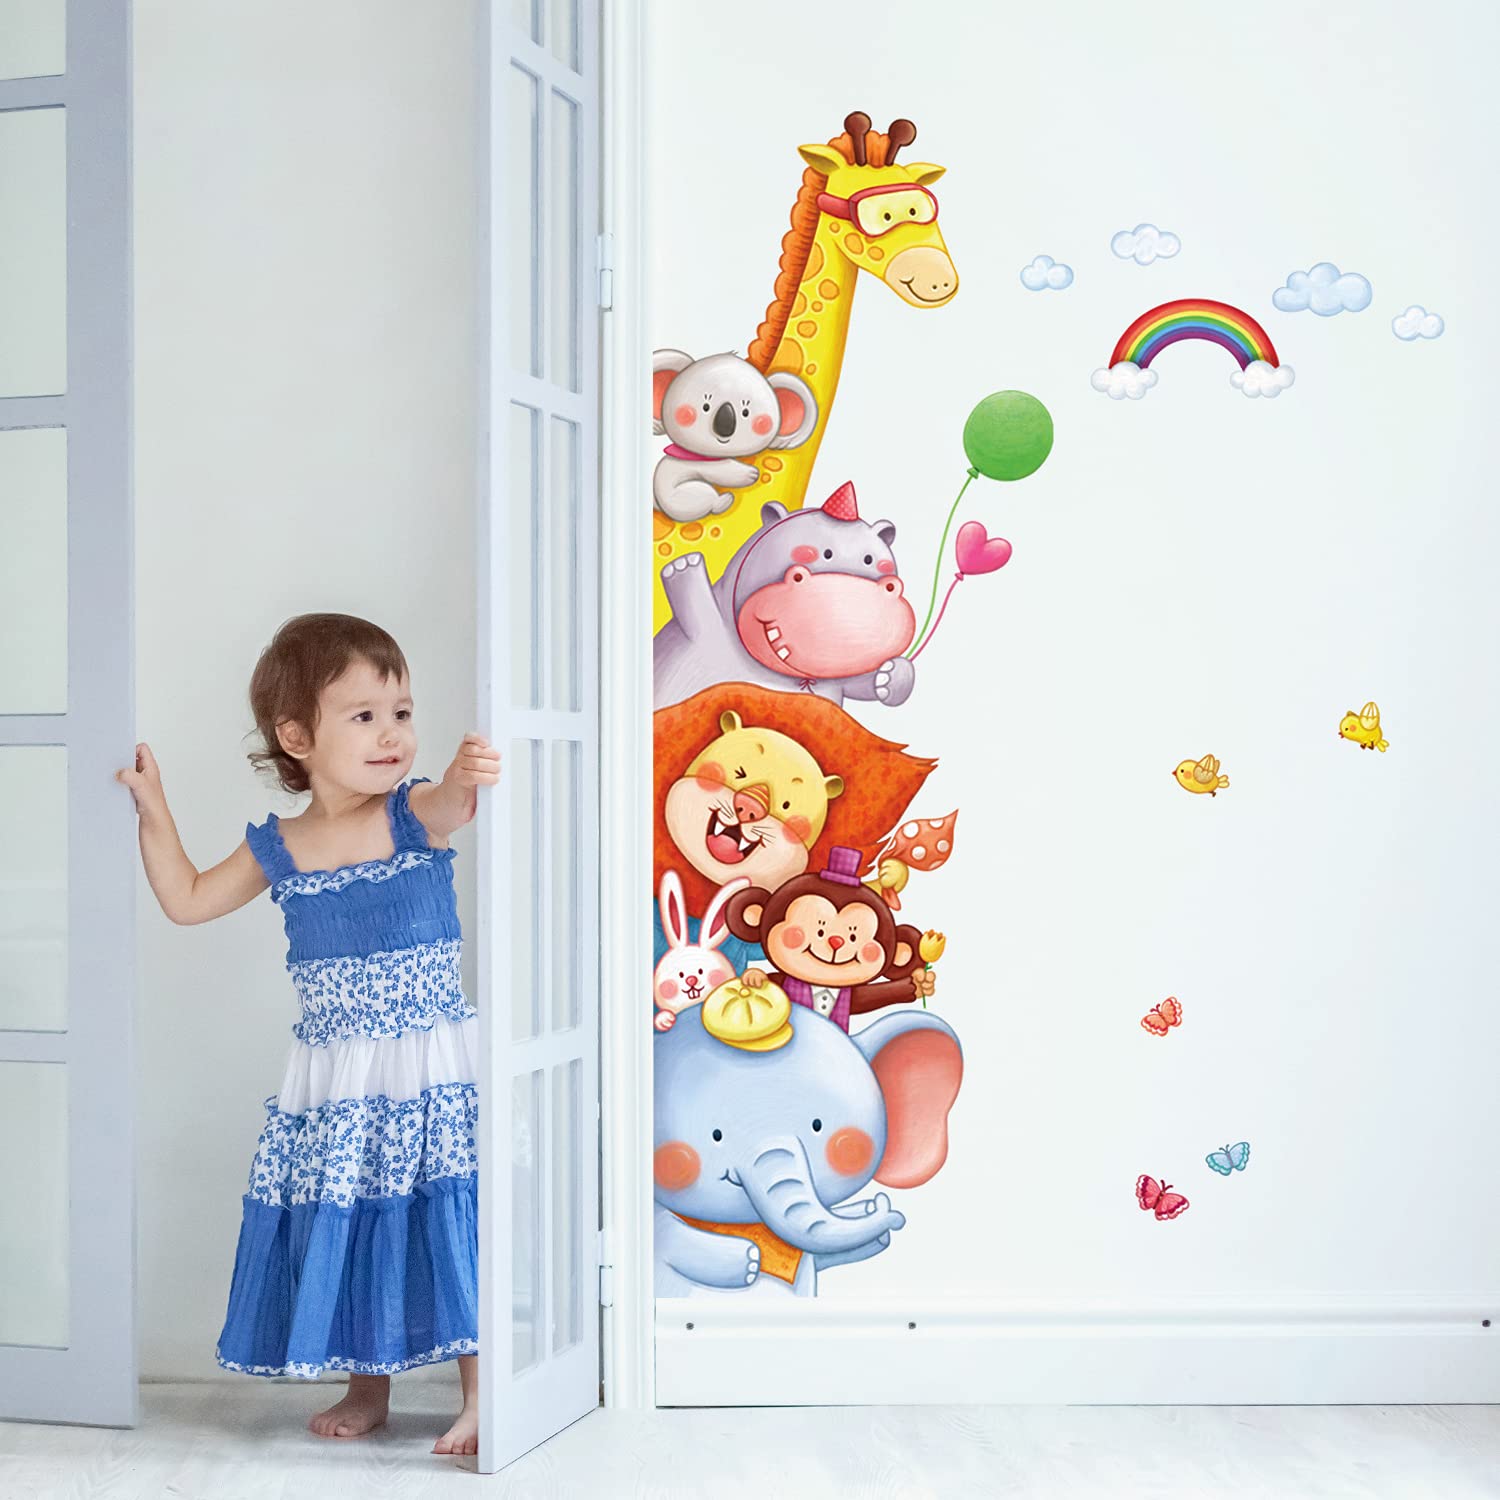 DECOWALL DA-2016 Animal Corner Kids Wall Stickers Decals Peel and Stick Removable for Nursery Bedroom Living Room Art murals Decorations